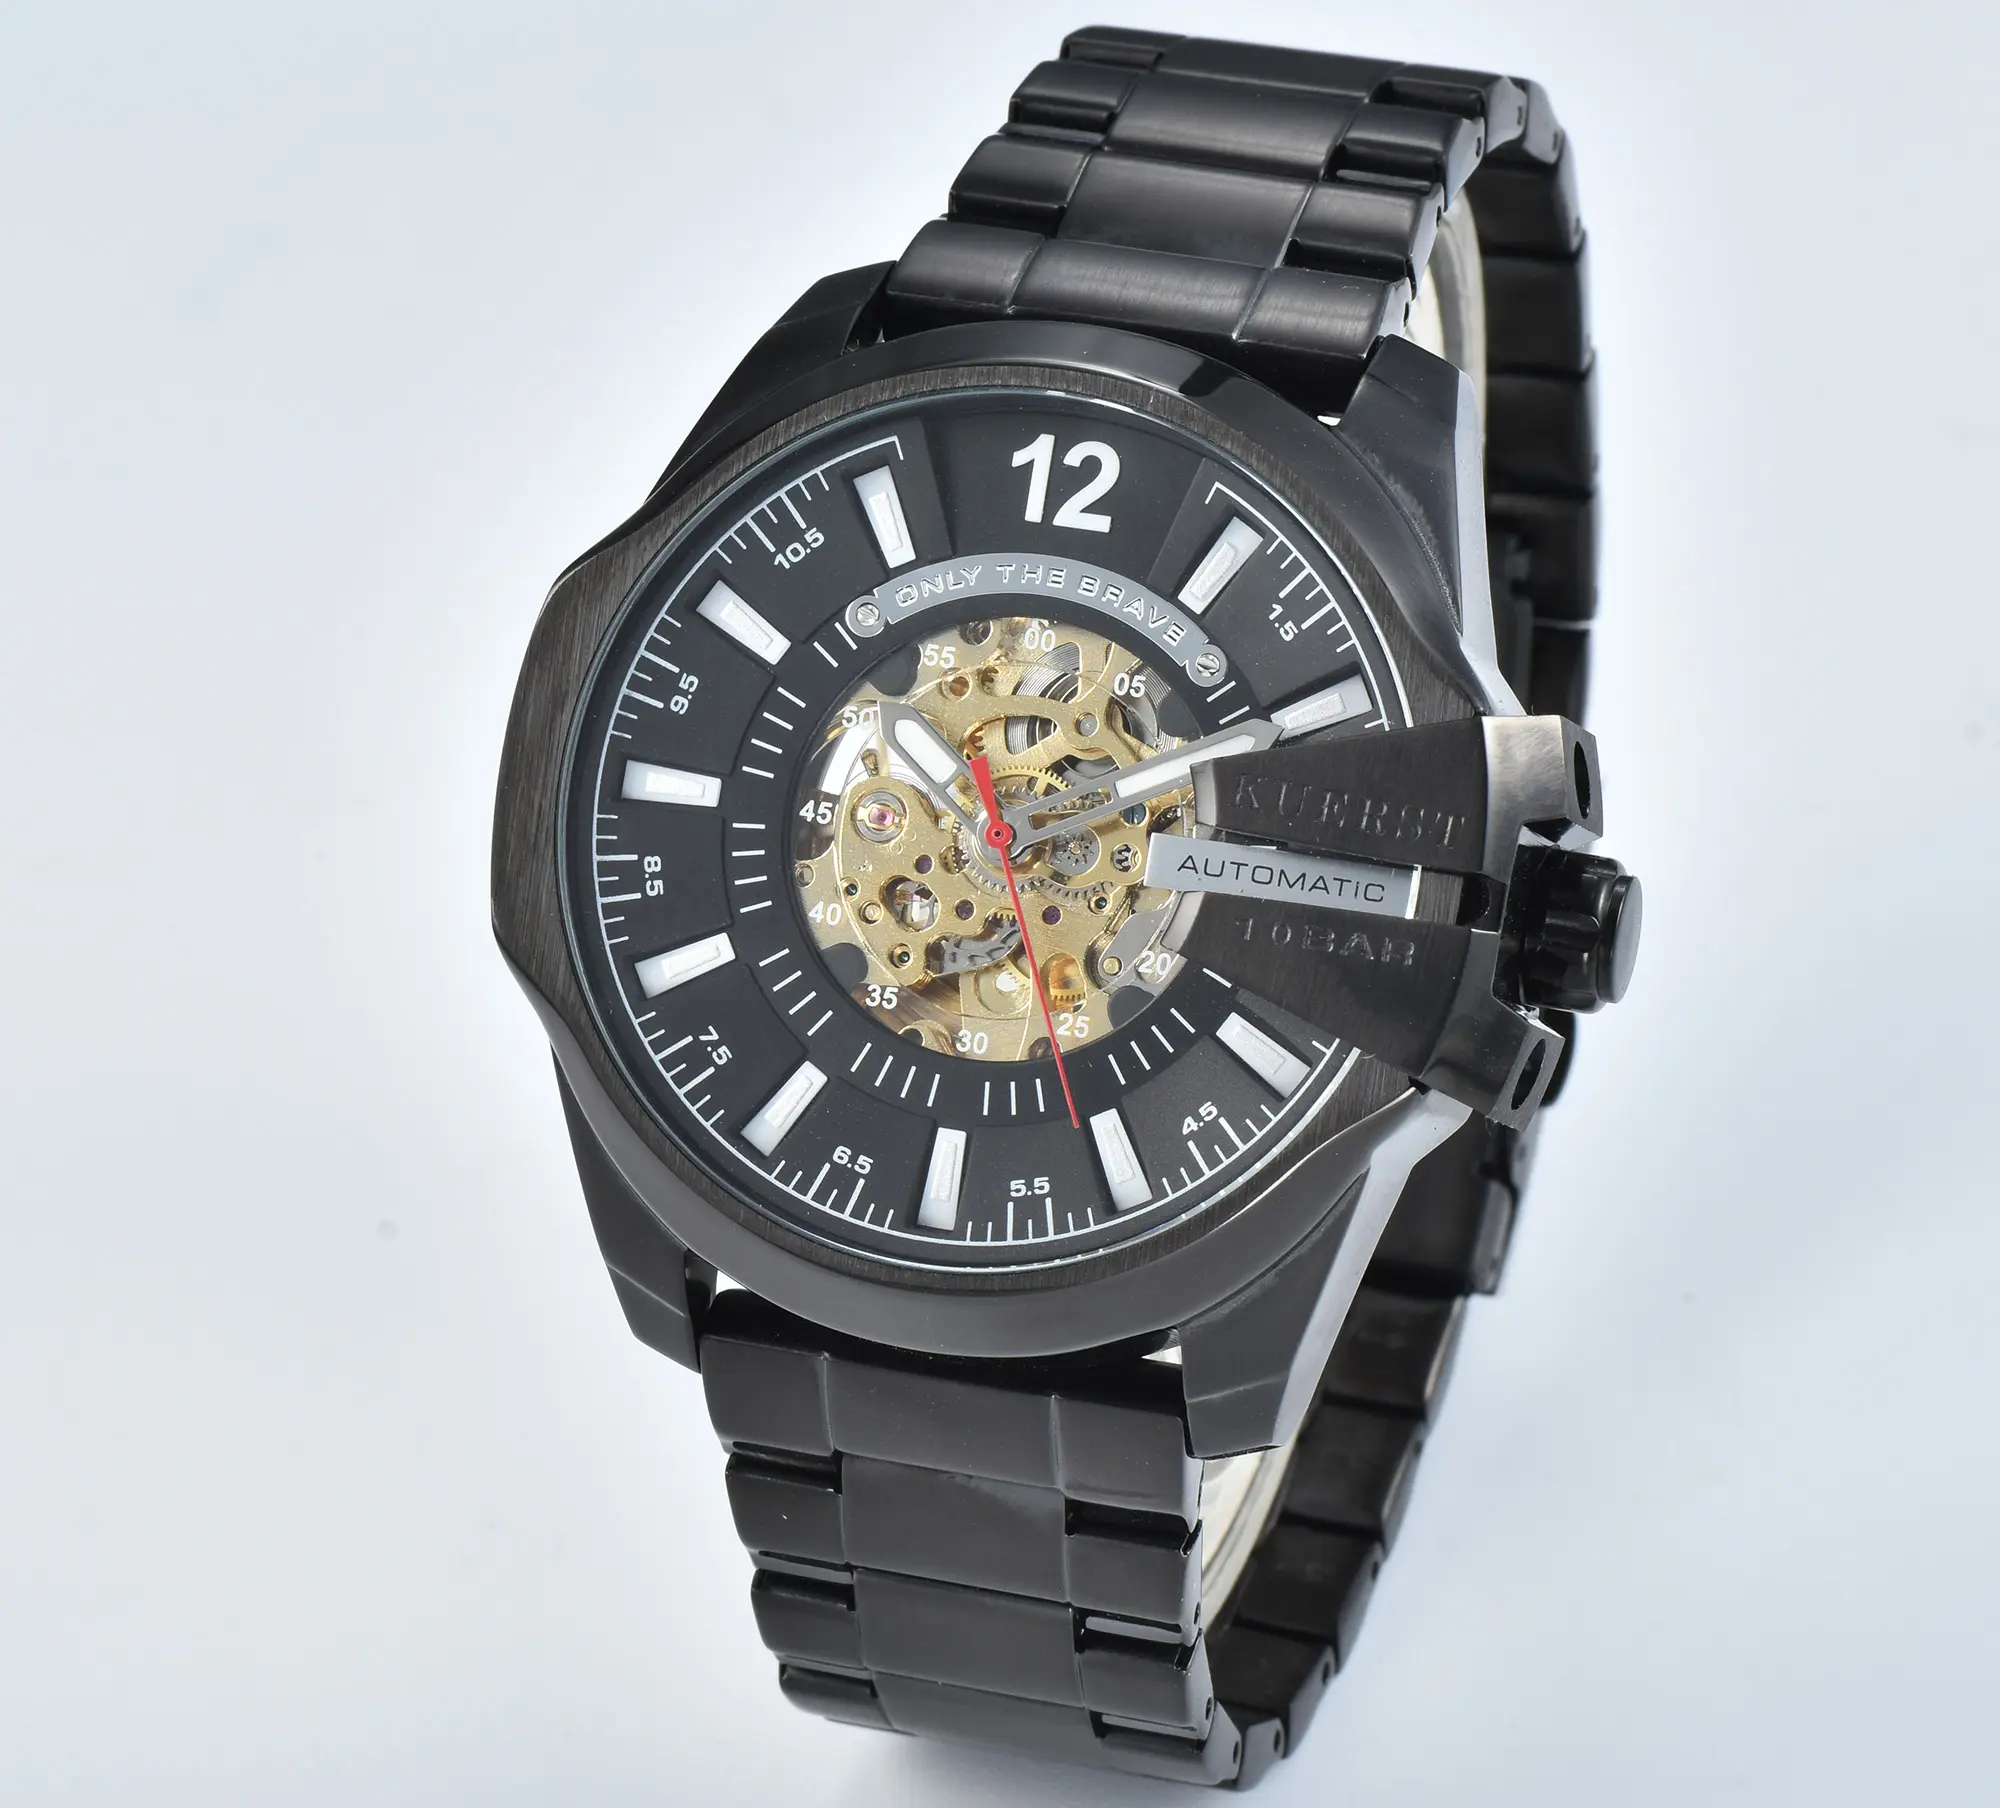 KUERST stainless steel automatic mechanical watch Sports black men's watch